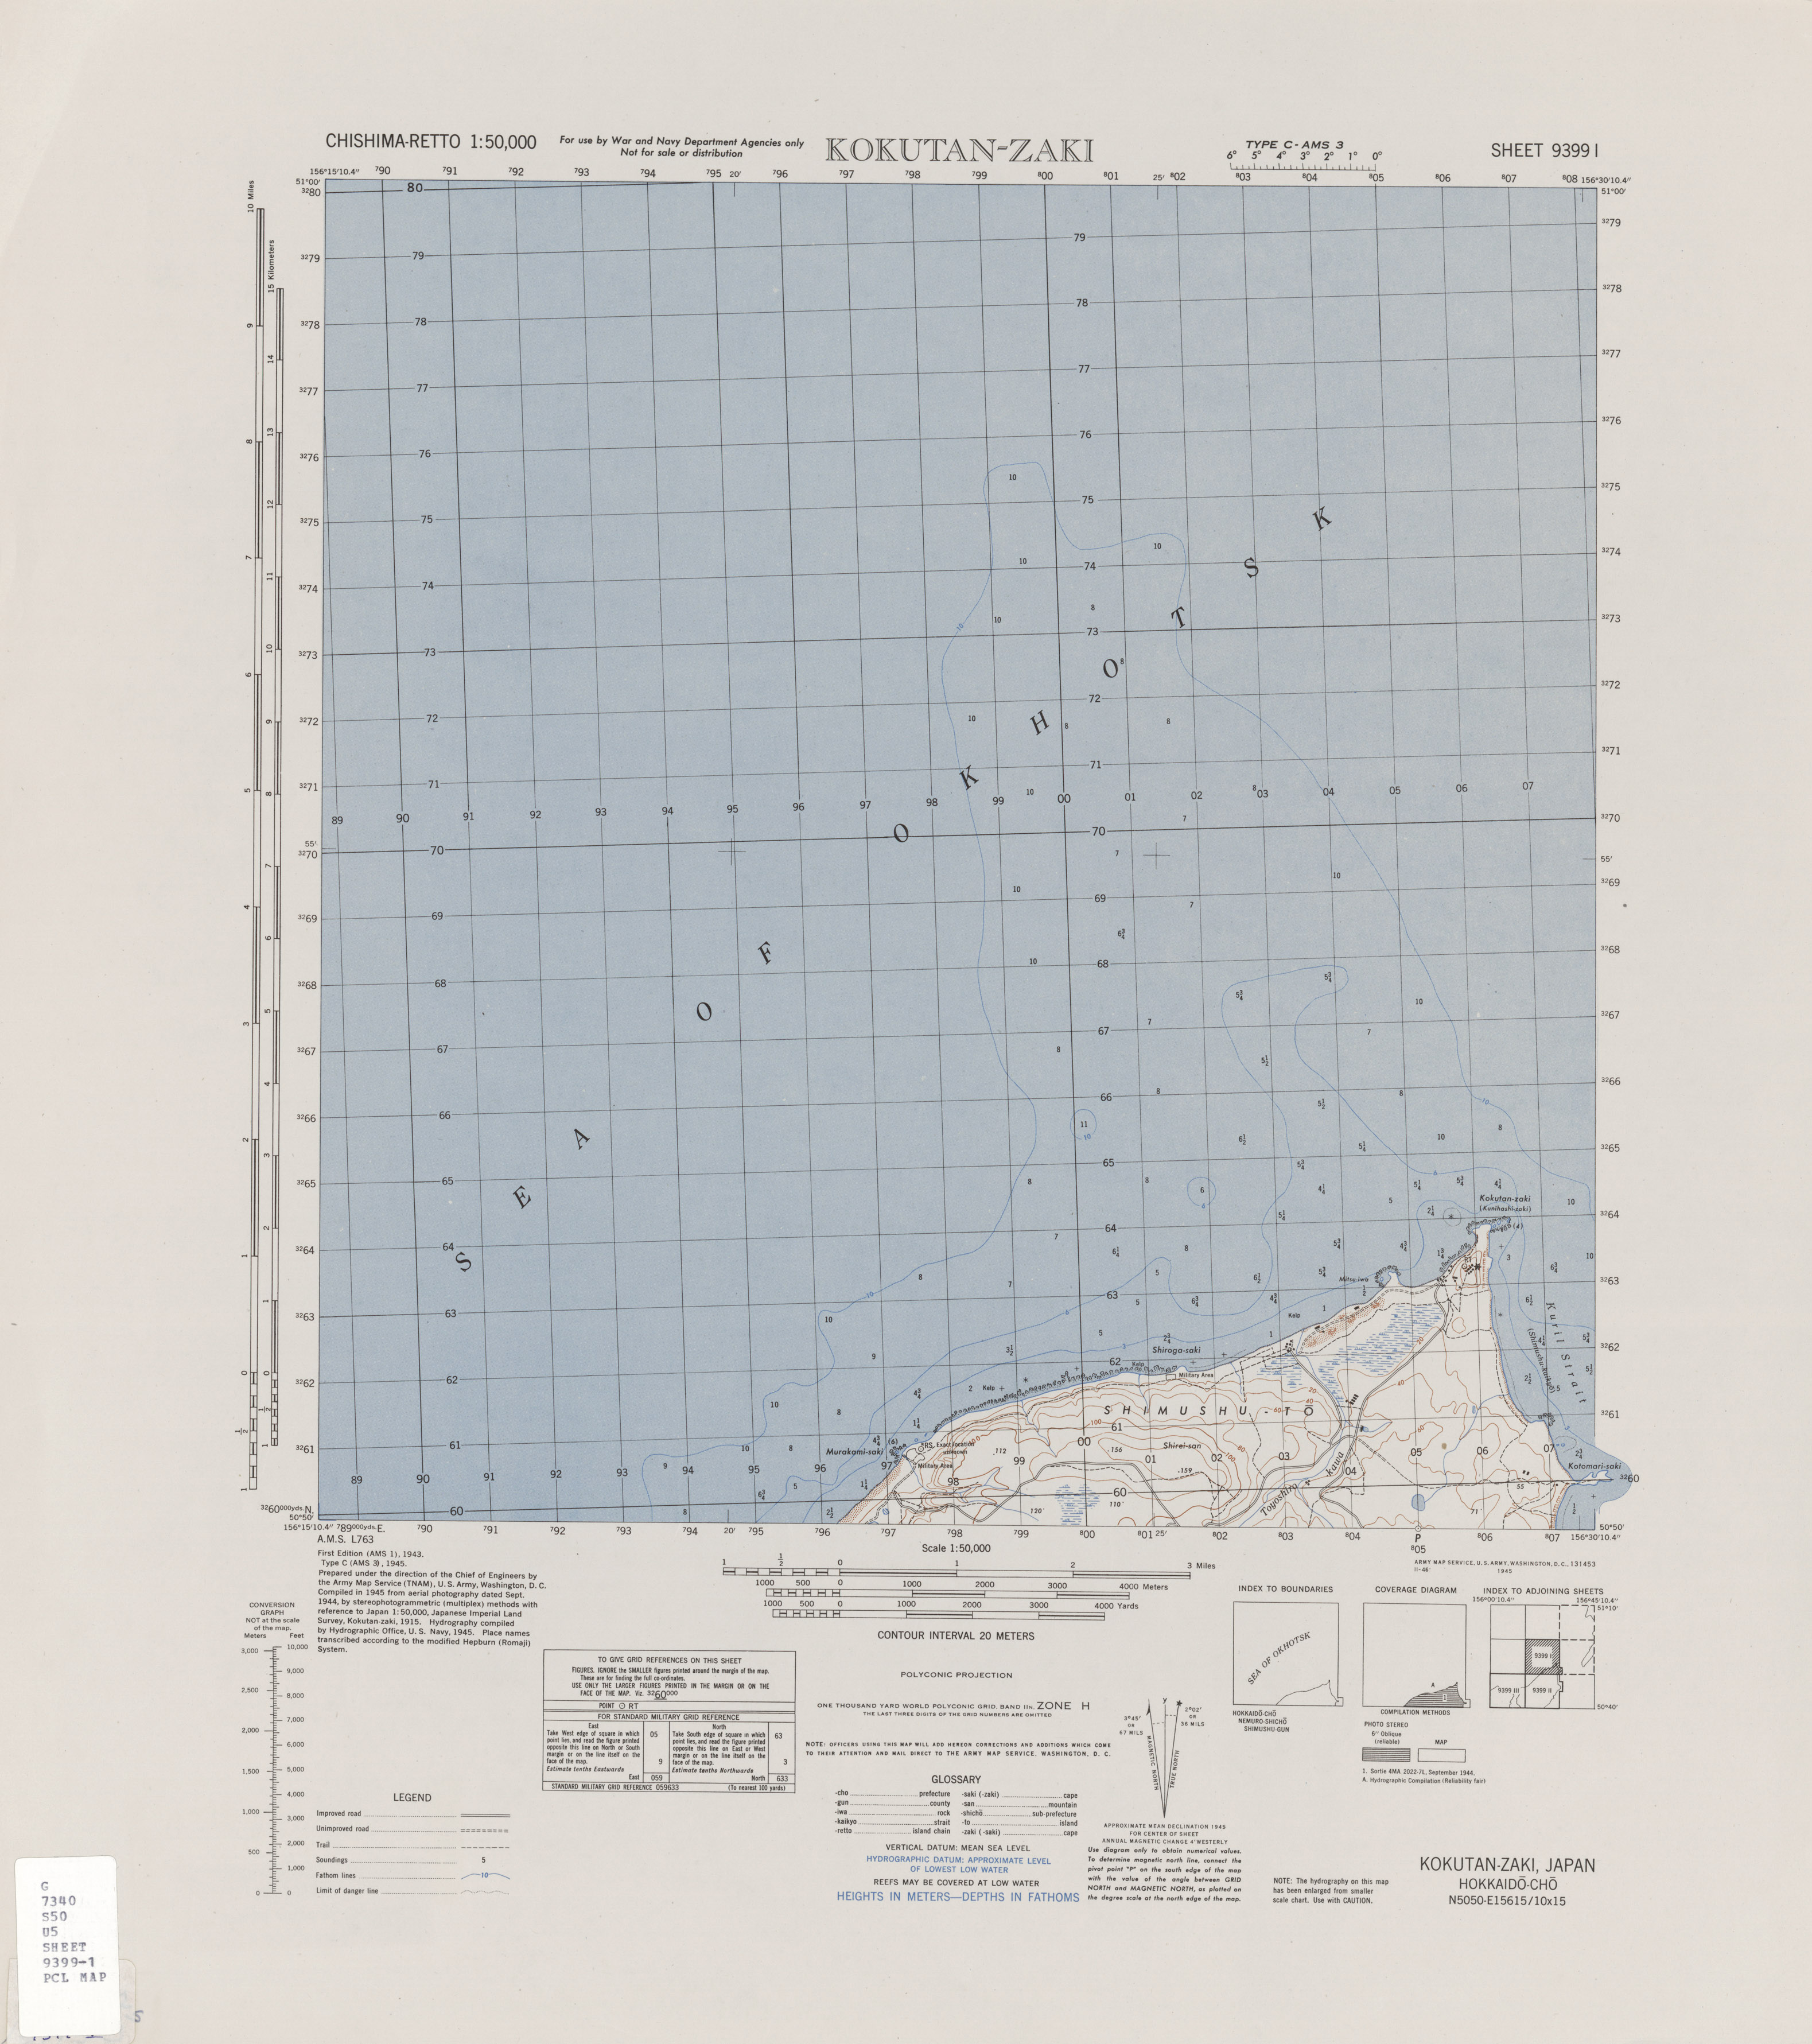 Chishima-Retto AMS Topographic Maps - Perry-Castañeda Map Collection ...